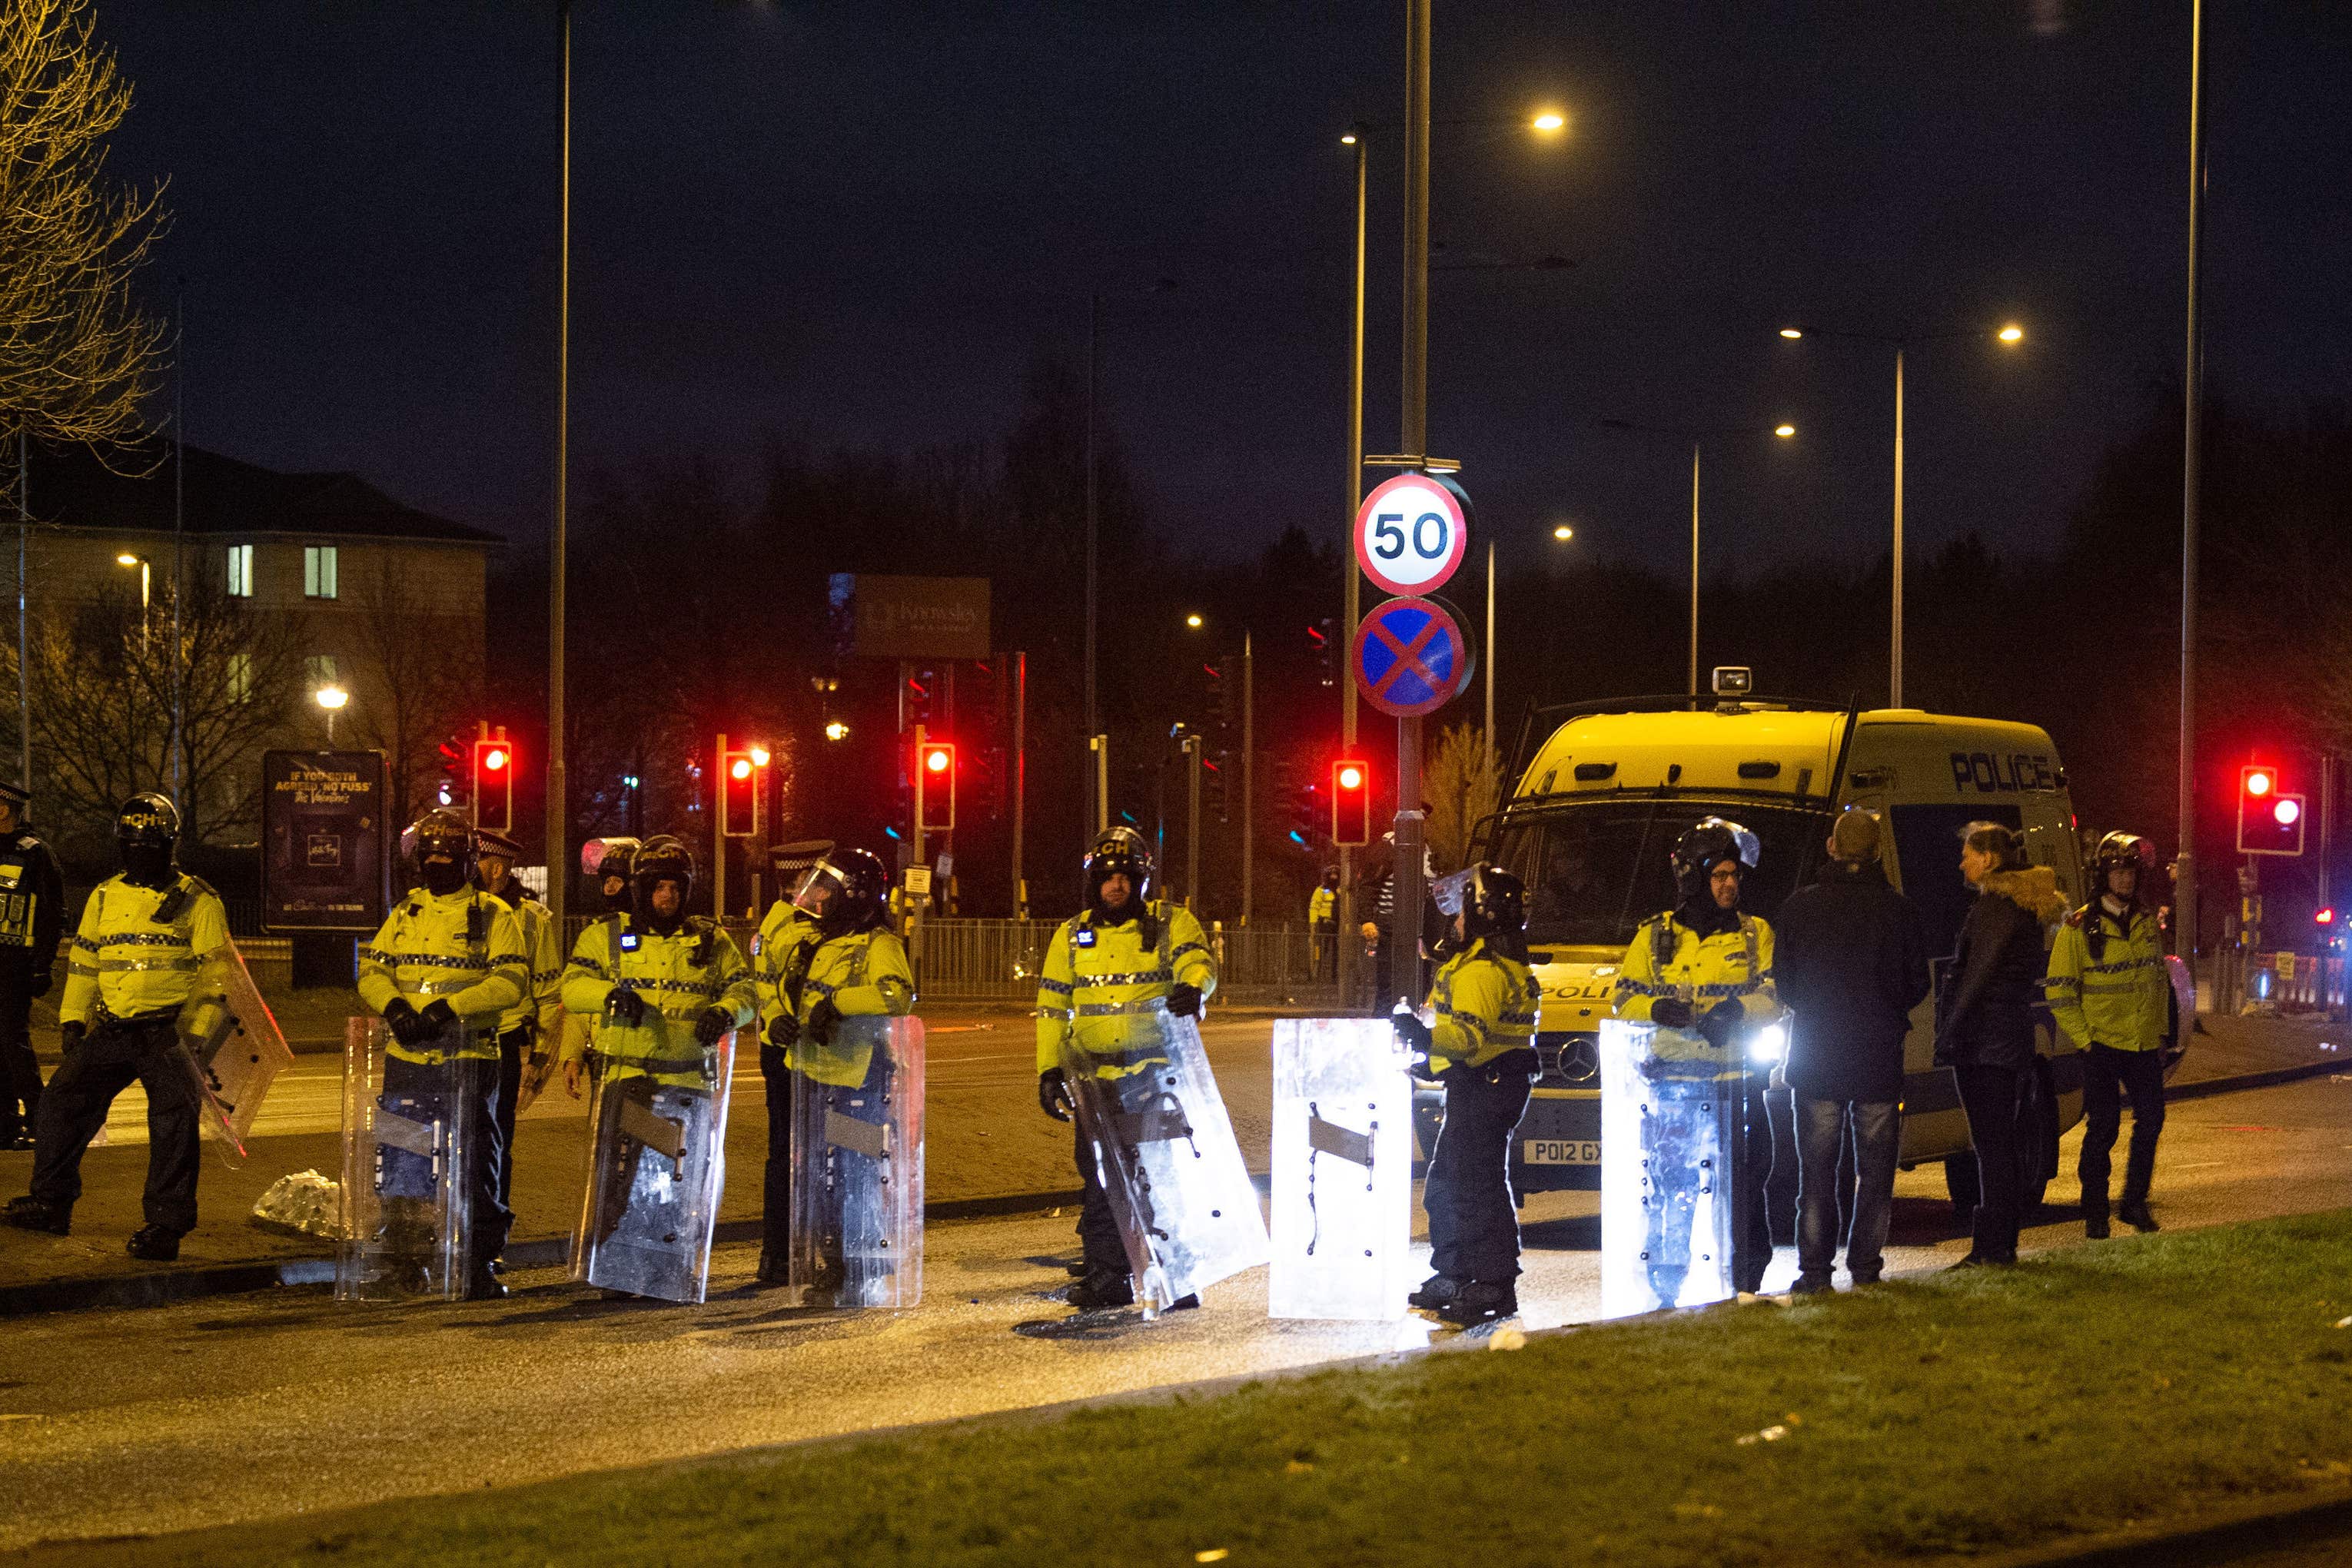 Police in riot gear attend the protest outside the Suites Hotel in Knowsley